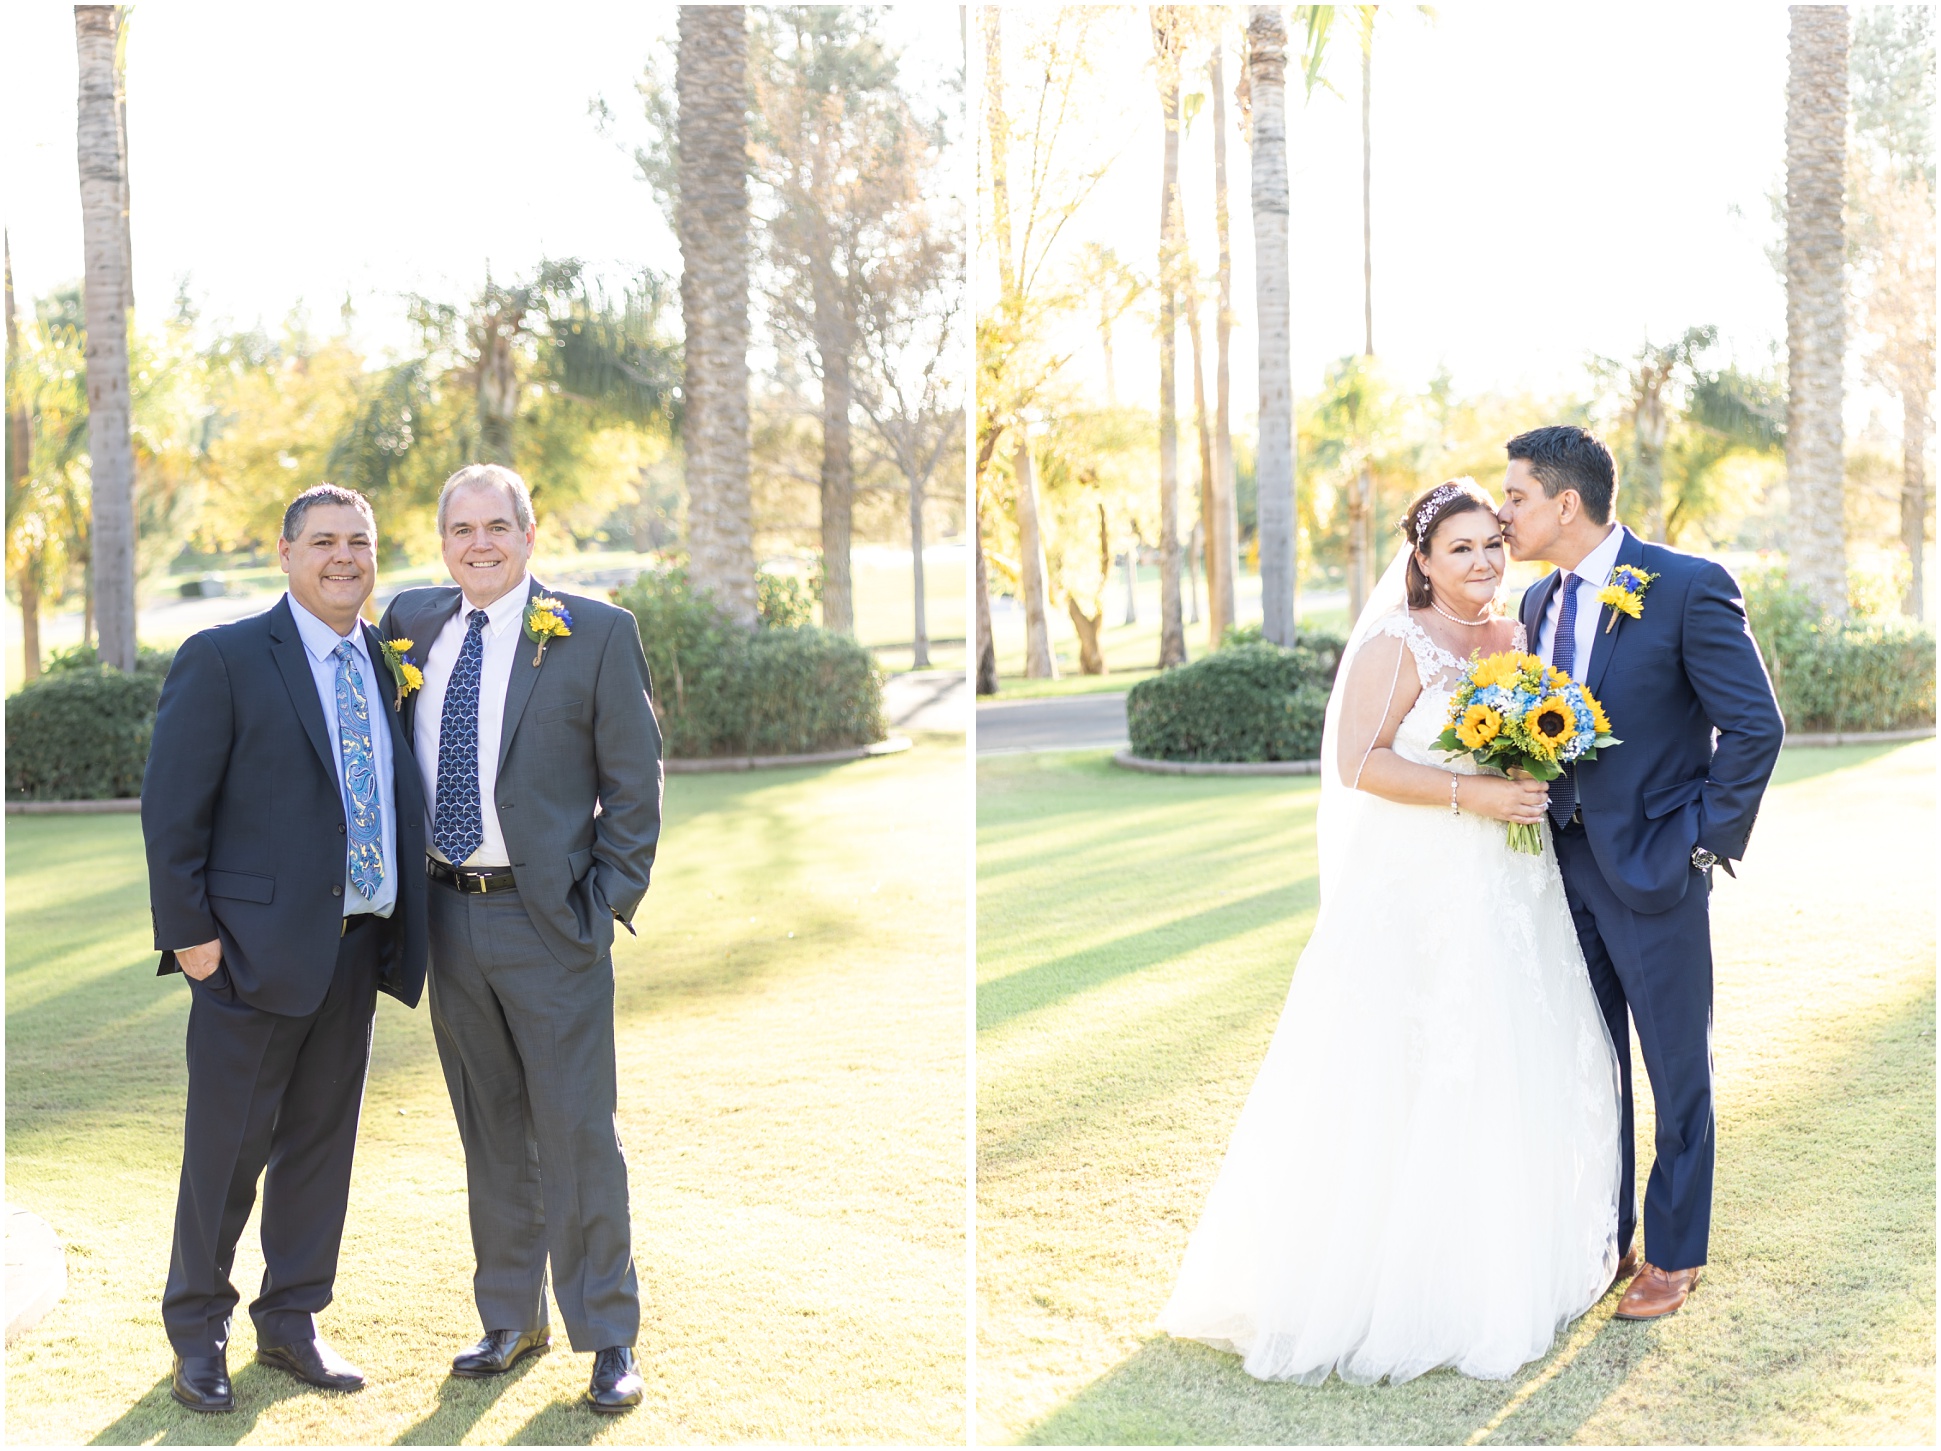 Left Image: Groom and best man, Right Image: Bride and Man of Honor